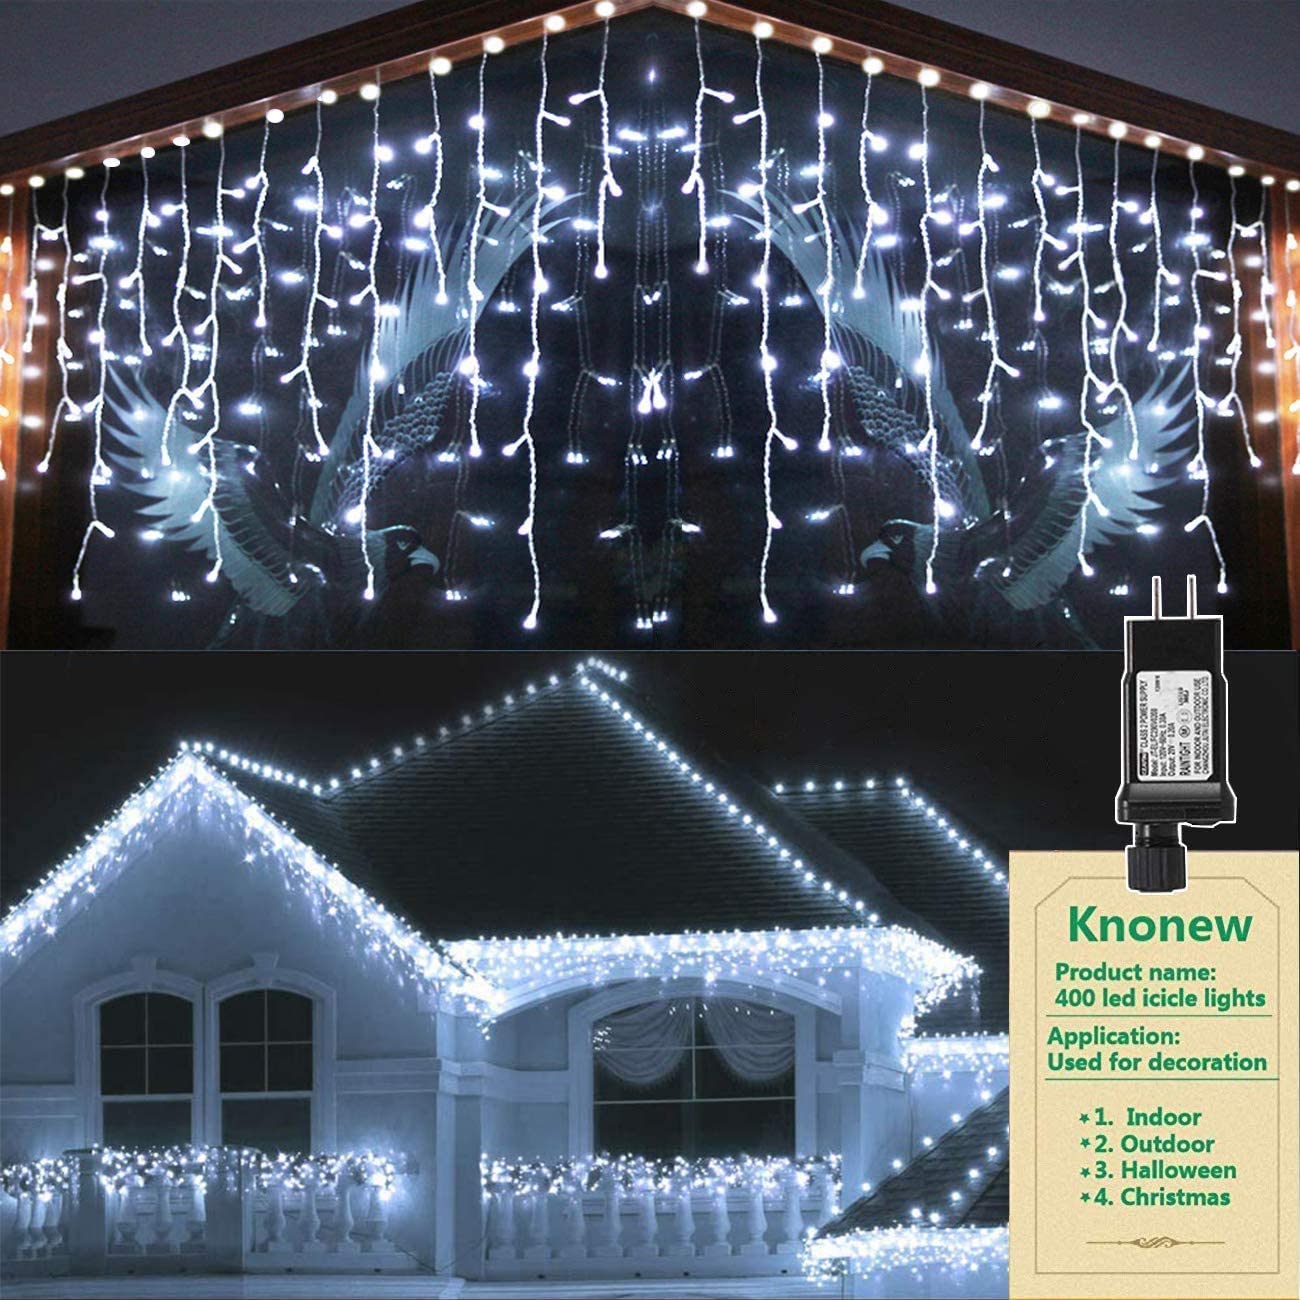 600 White Super Bright LED Multi Function String Lights L600W Indoor/Outdoor 